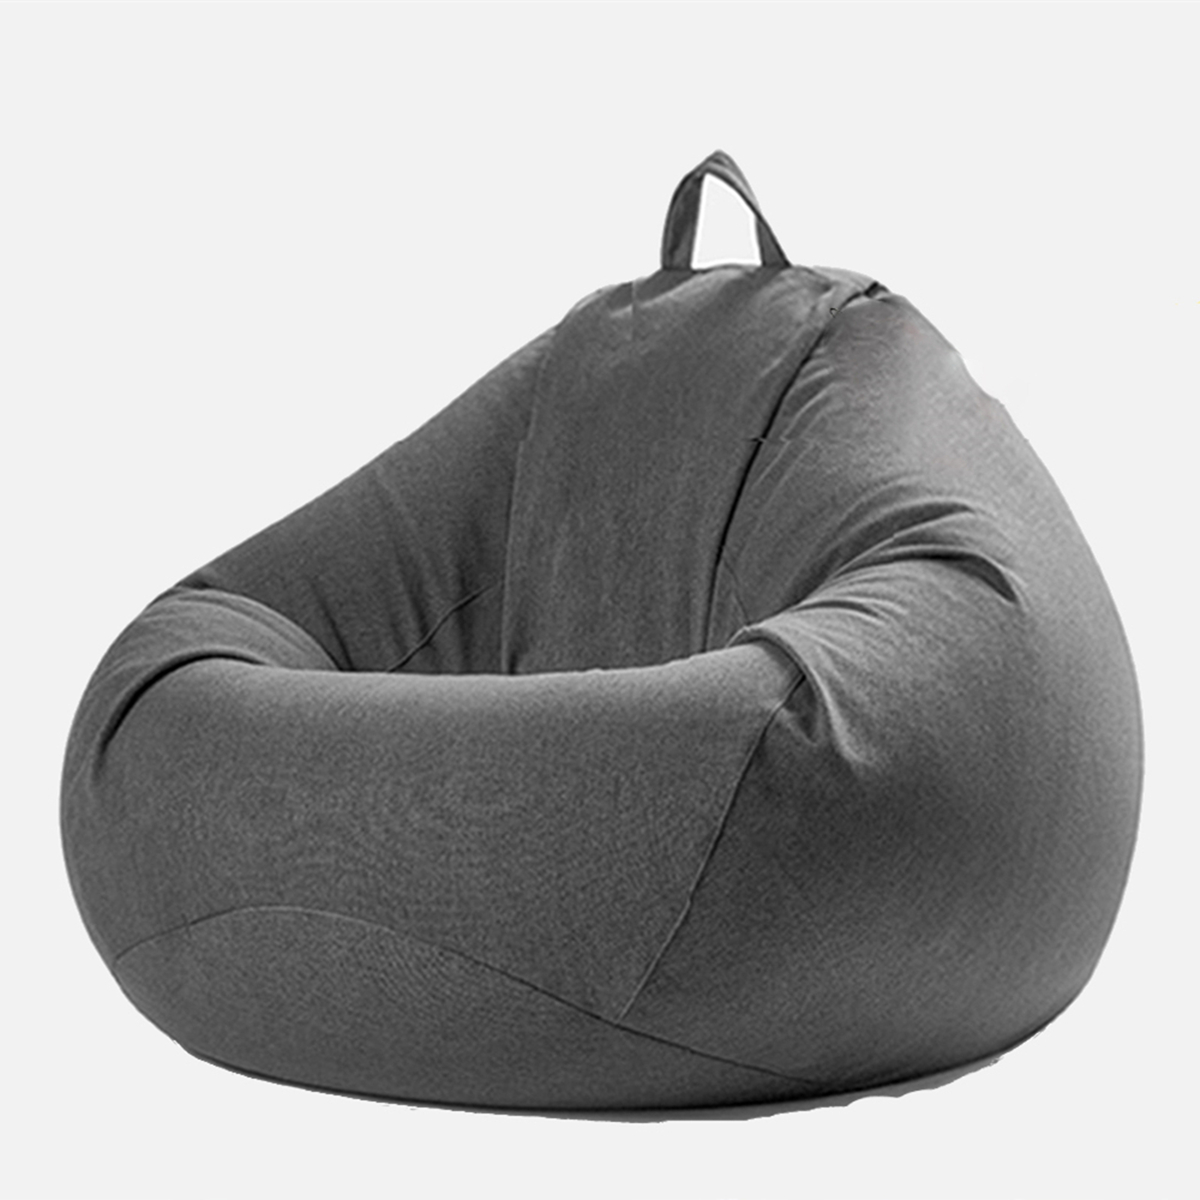 Extra Large Bean Bag Chair Lazy Sofa Cover Indoor Outdoor Game Seat No ...